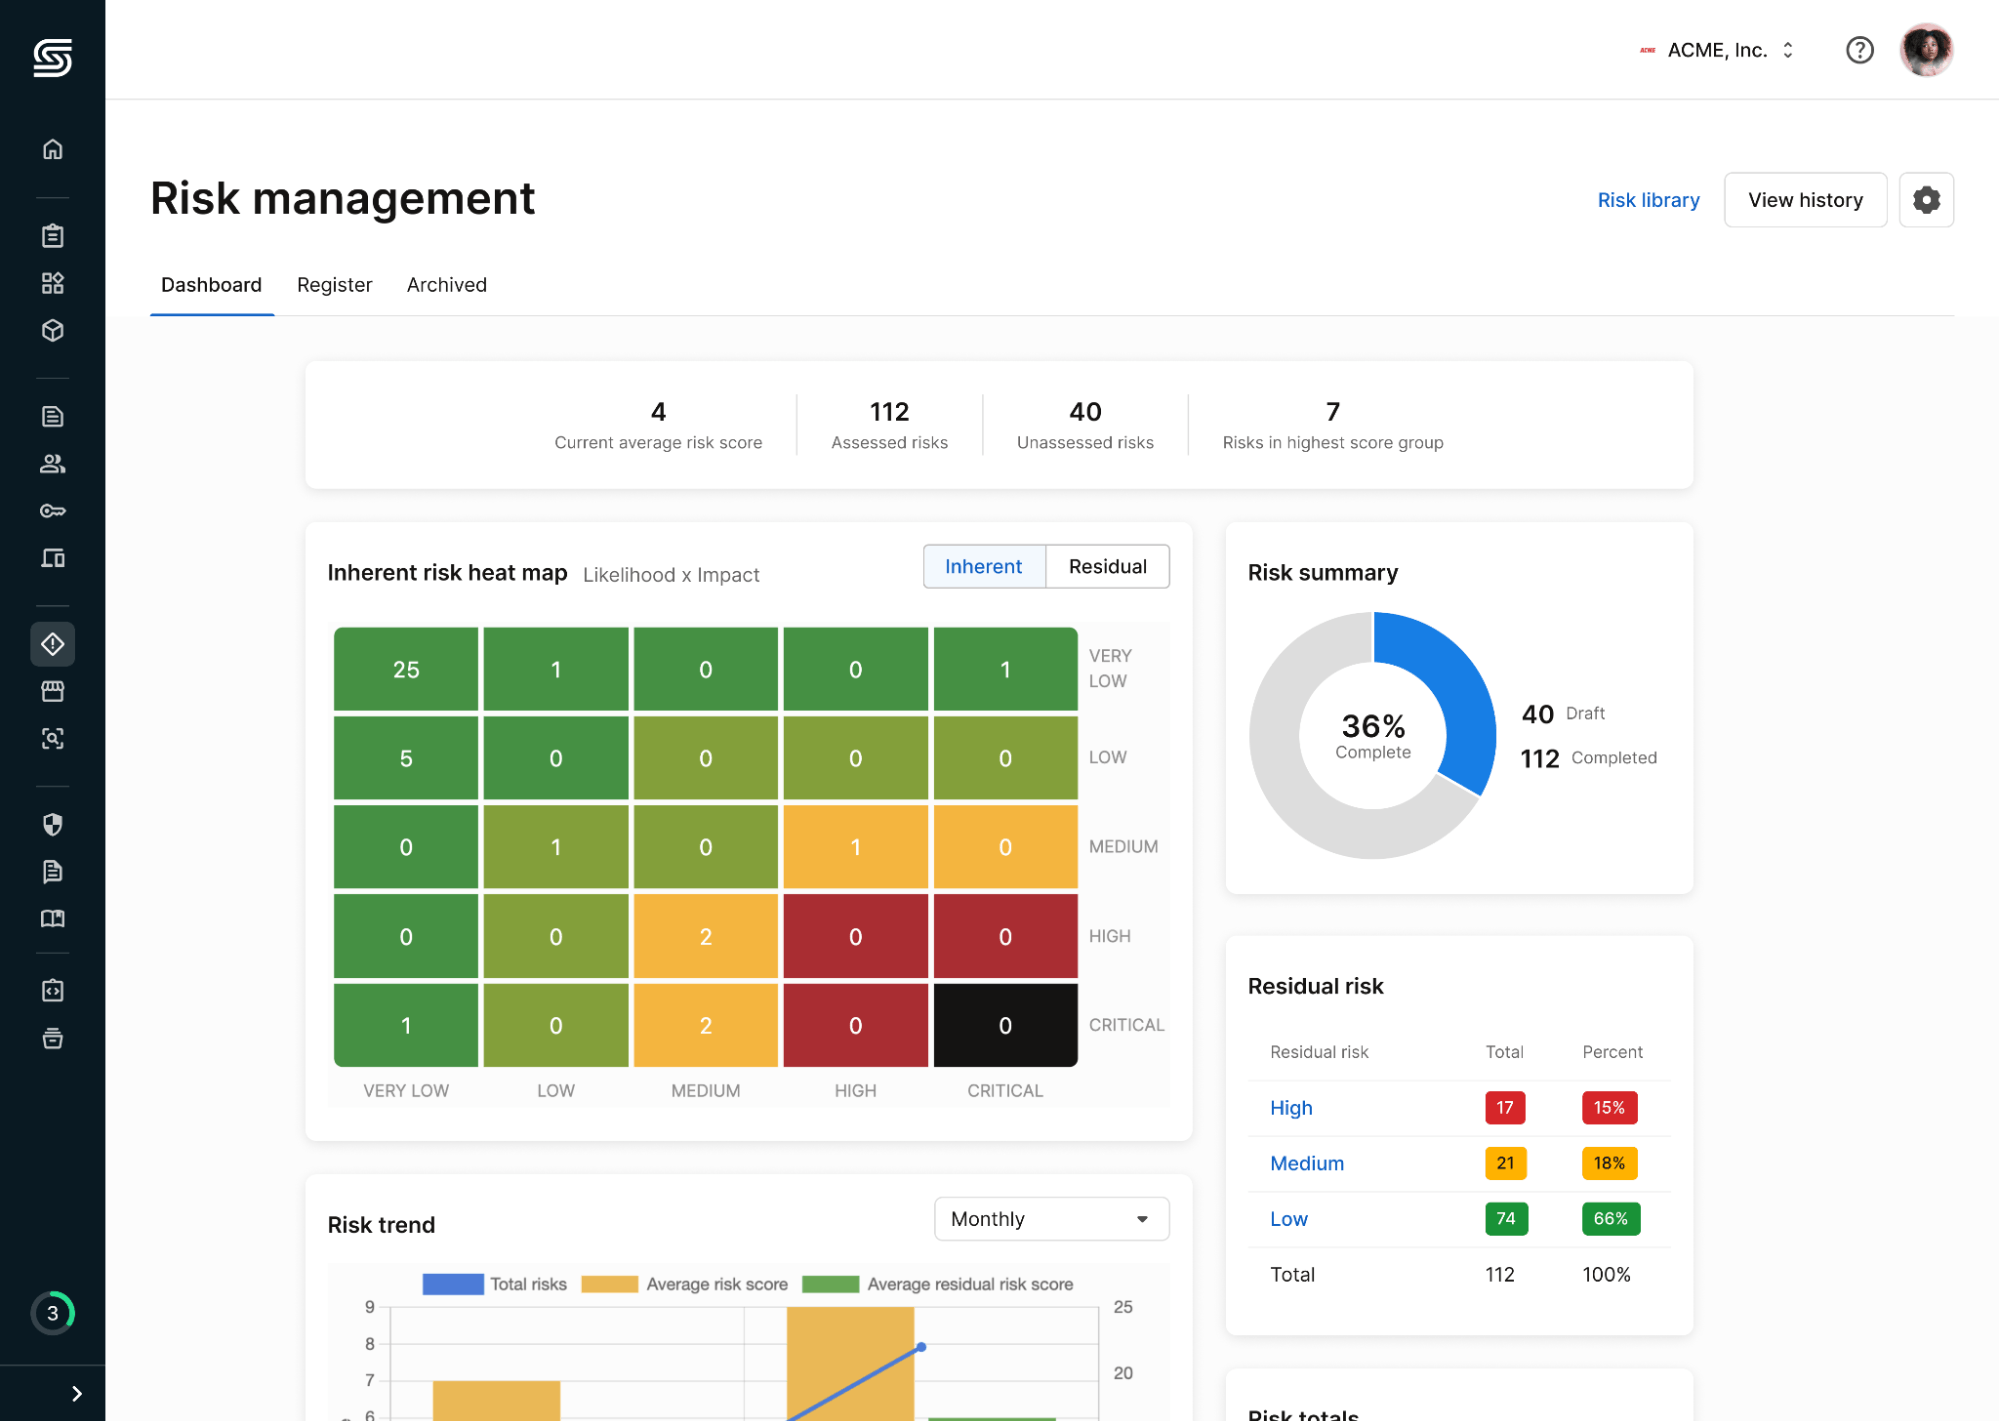 Risk management dashboard in Secureframe app showing inherent risk heat map, risk summary, residual risk, and risk trend